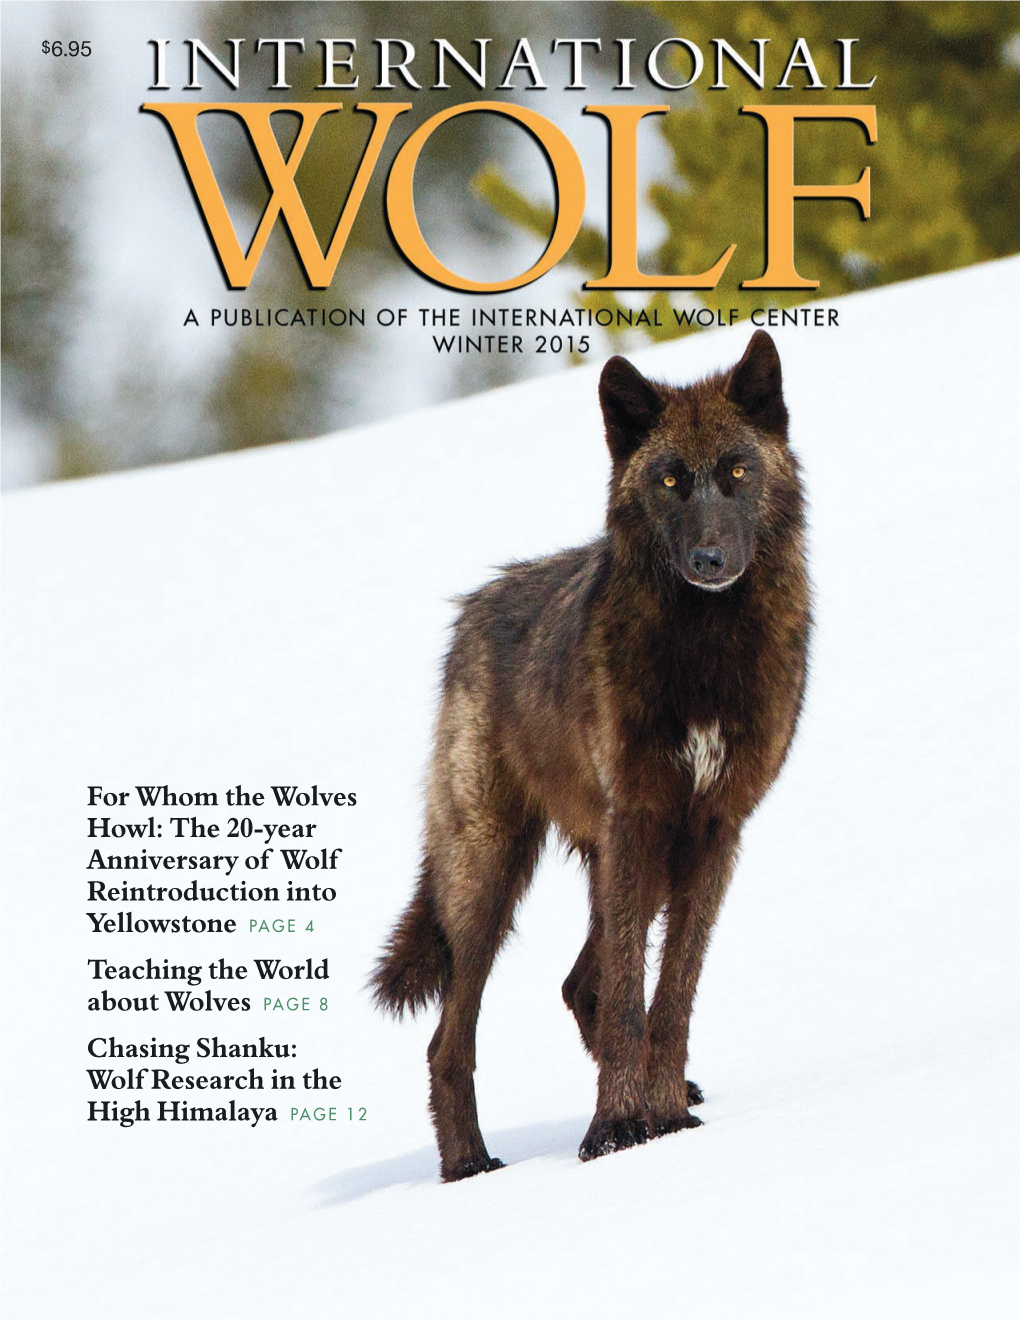 The 20-Year Anniversary of Wolf Reintroduction Into Yellowstone